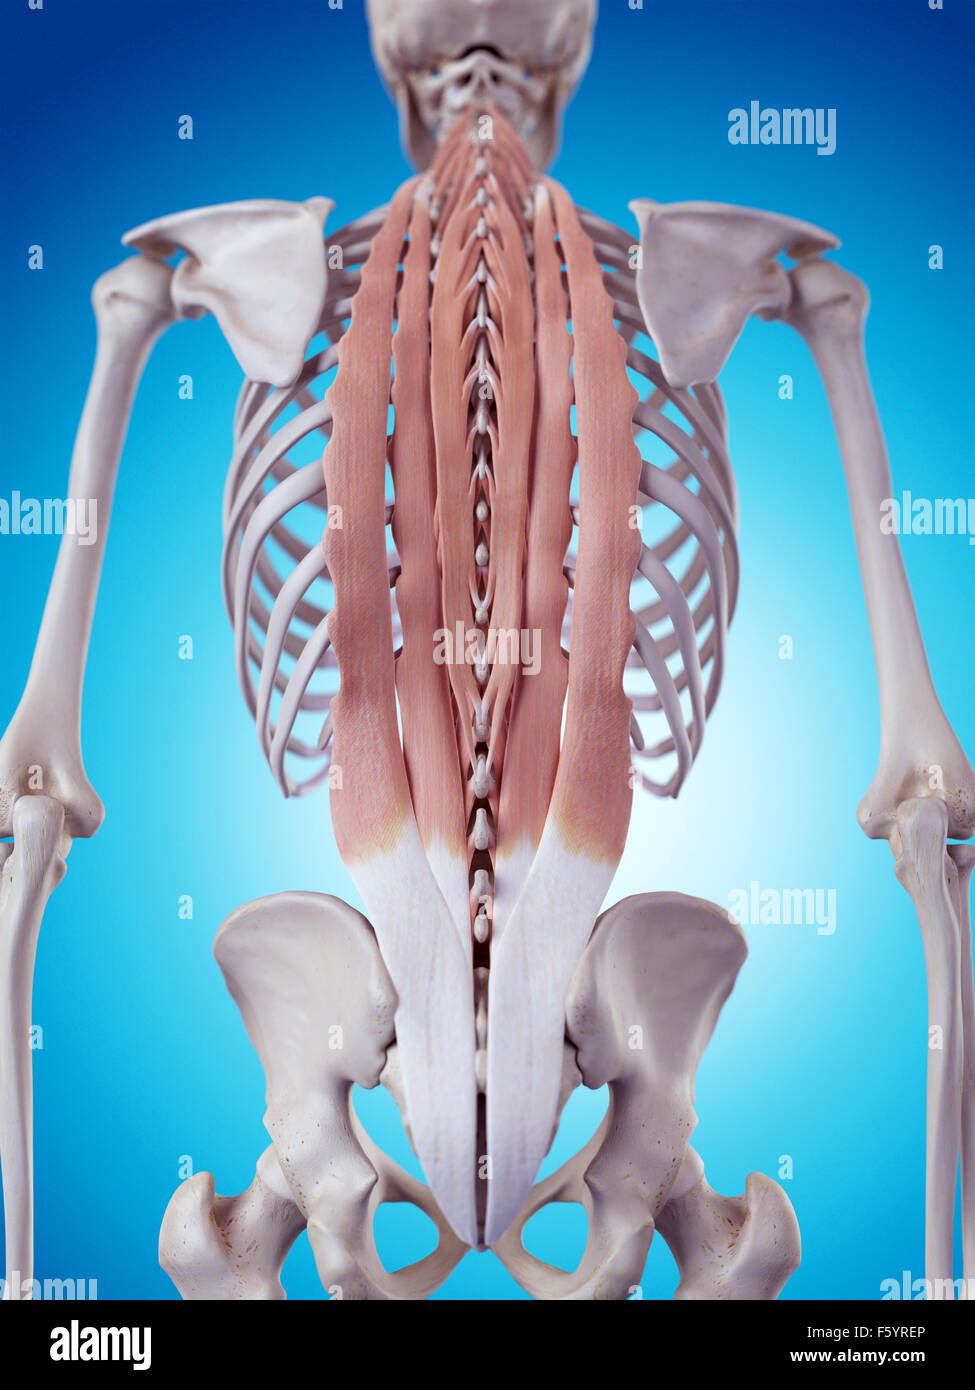 medically accurate illustration of the deep back muscles Stock Photo